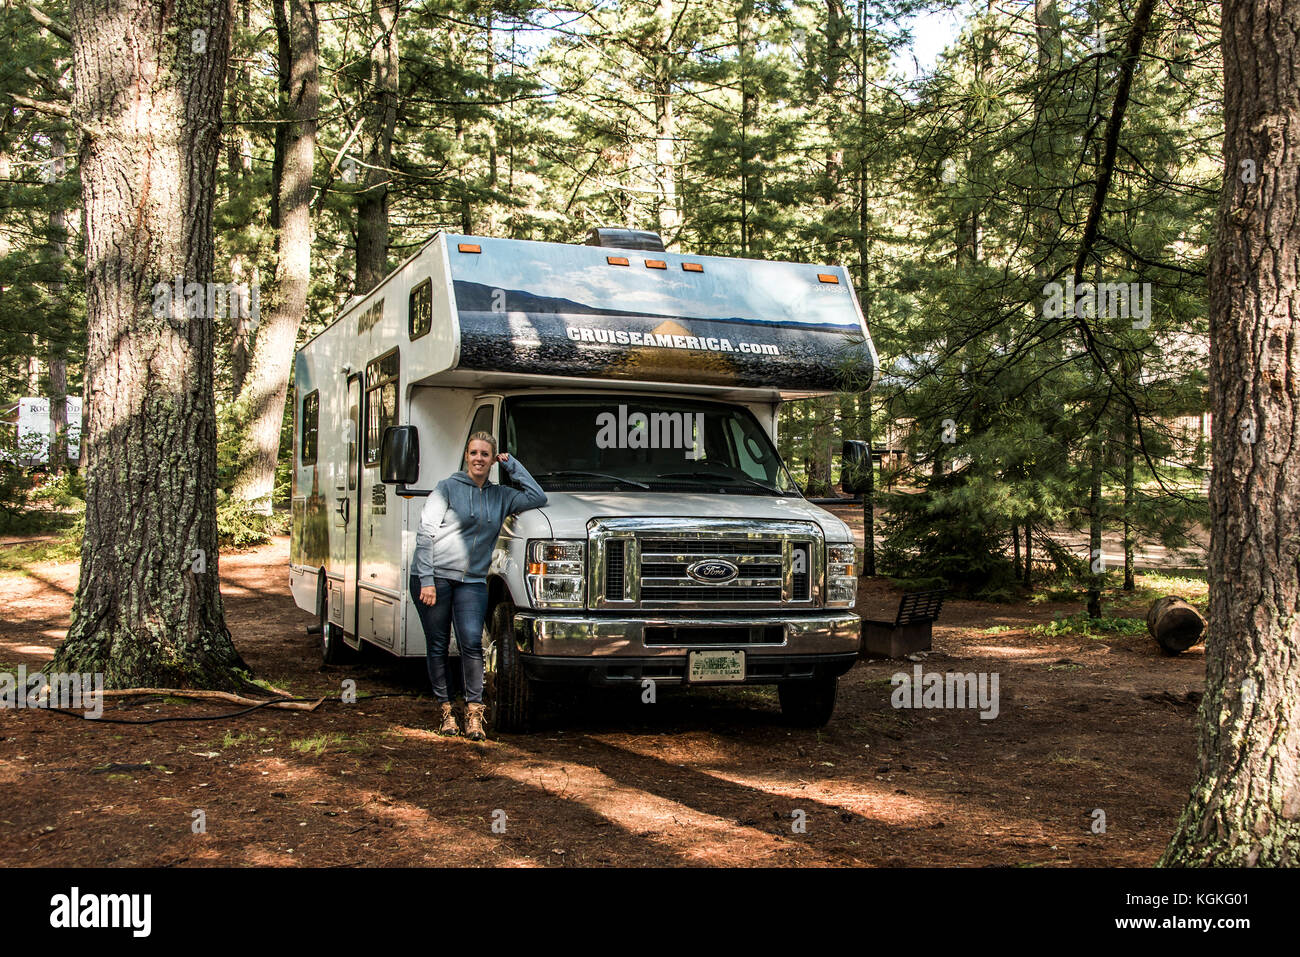 Canada Ontario Algonquin National Park 30.09.2017 - Woman in front of Parked RV camper car at Lake of two rivers Campground Beautiful natural forest C Stock Photo